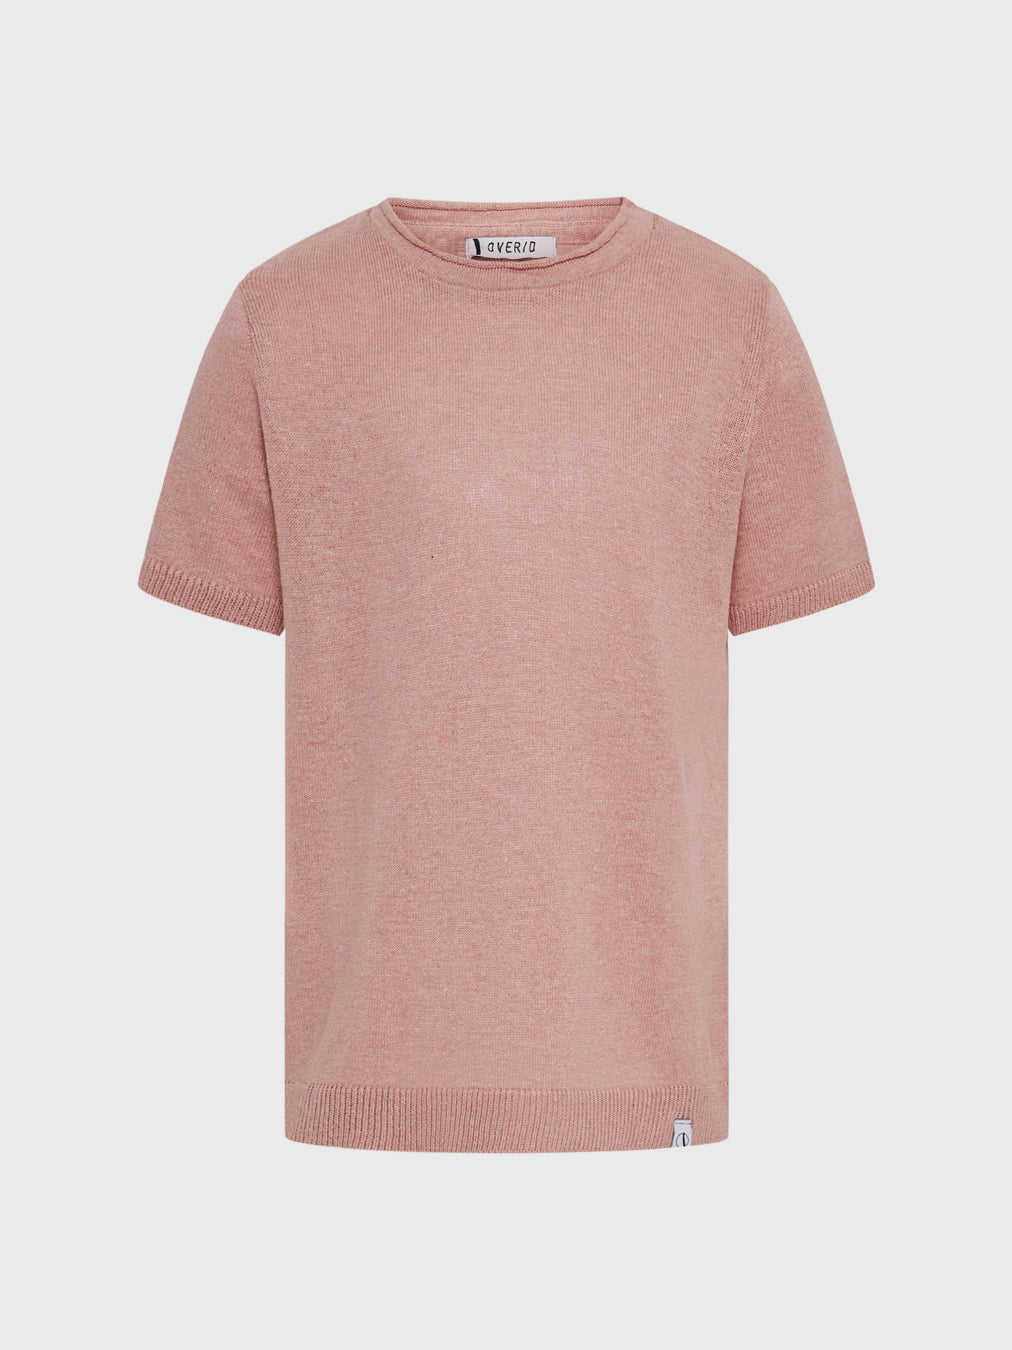 Over/D kids t shirt in filo rosa